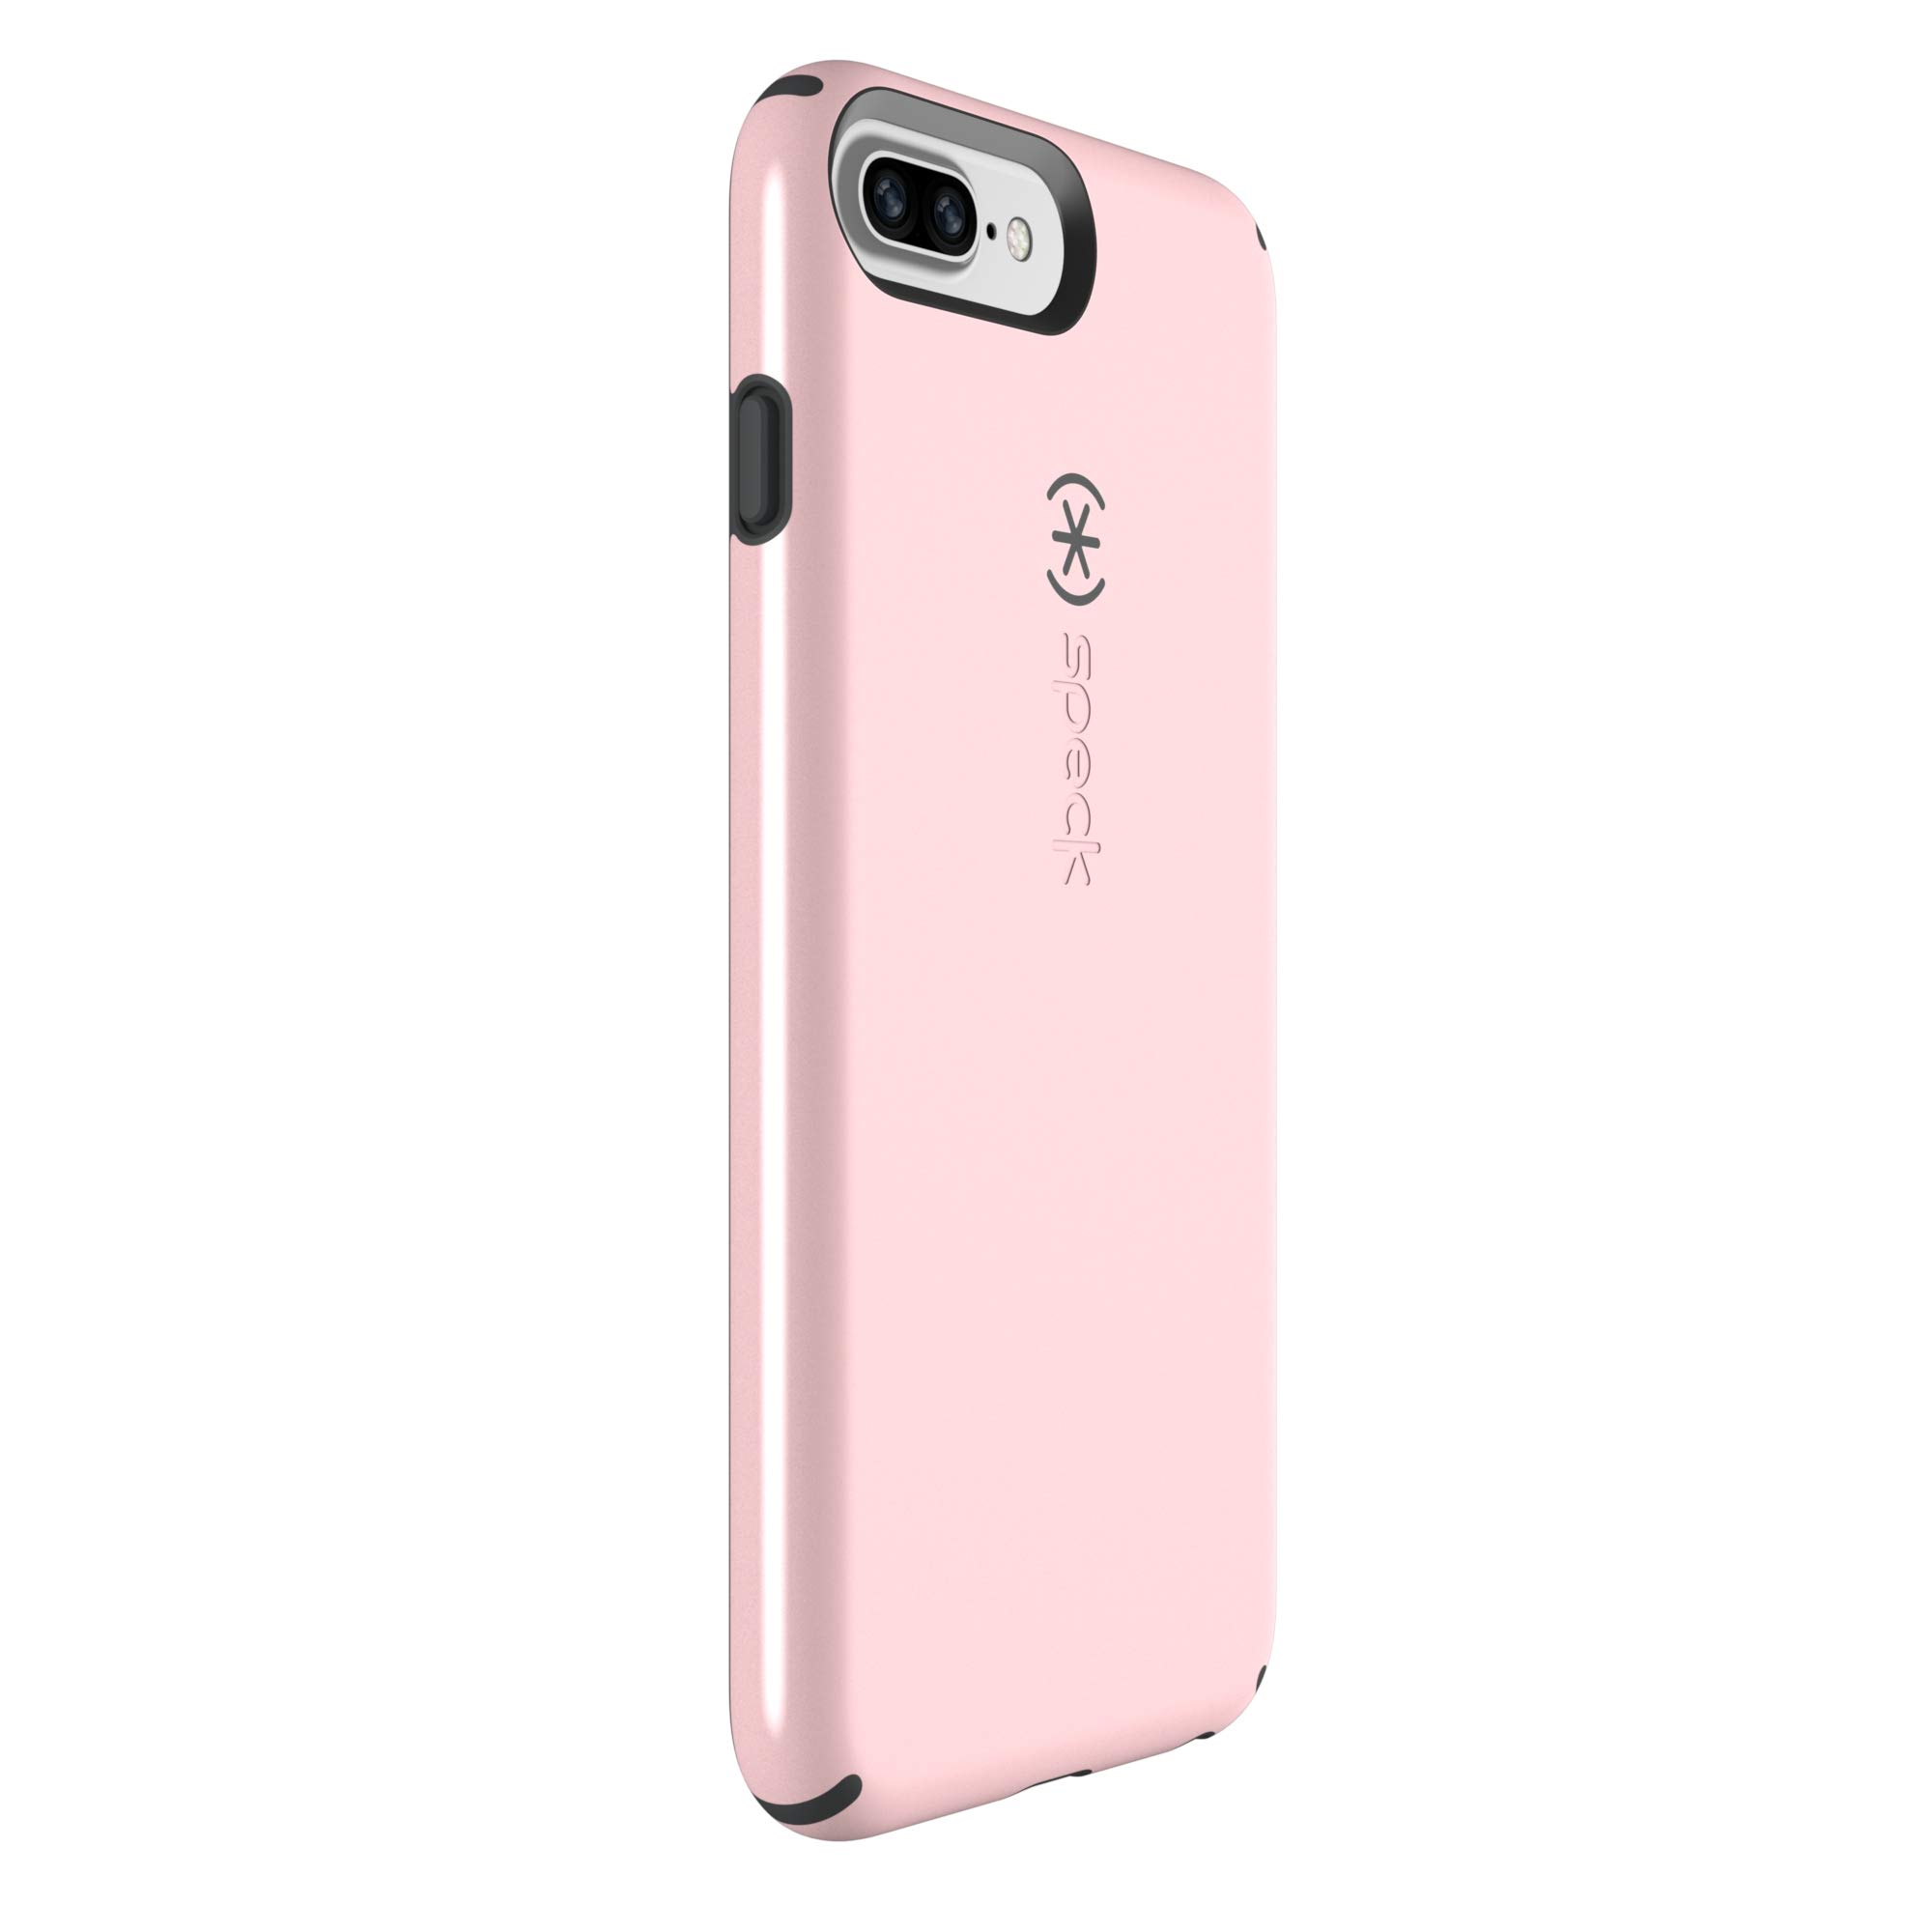 Speck Products CandyShell Cell Phone Case for iPhone 8 Plus/7 Plus/6S Plus - Quartz Pink/Slate Grey